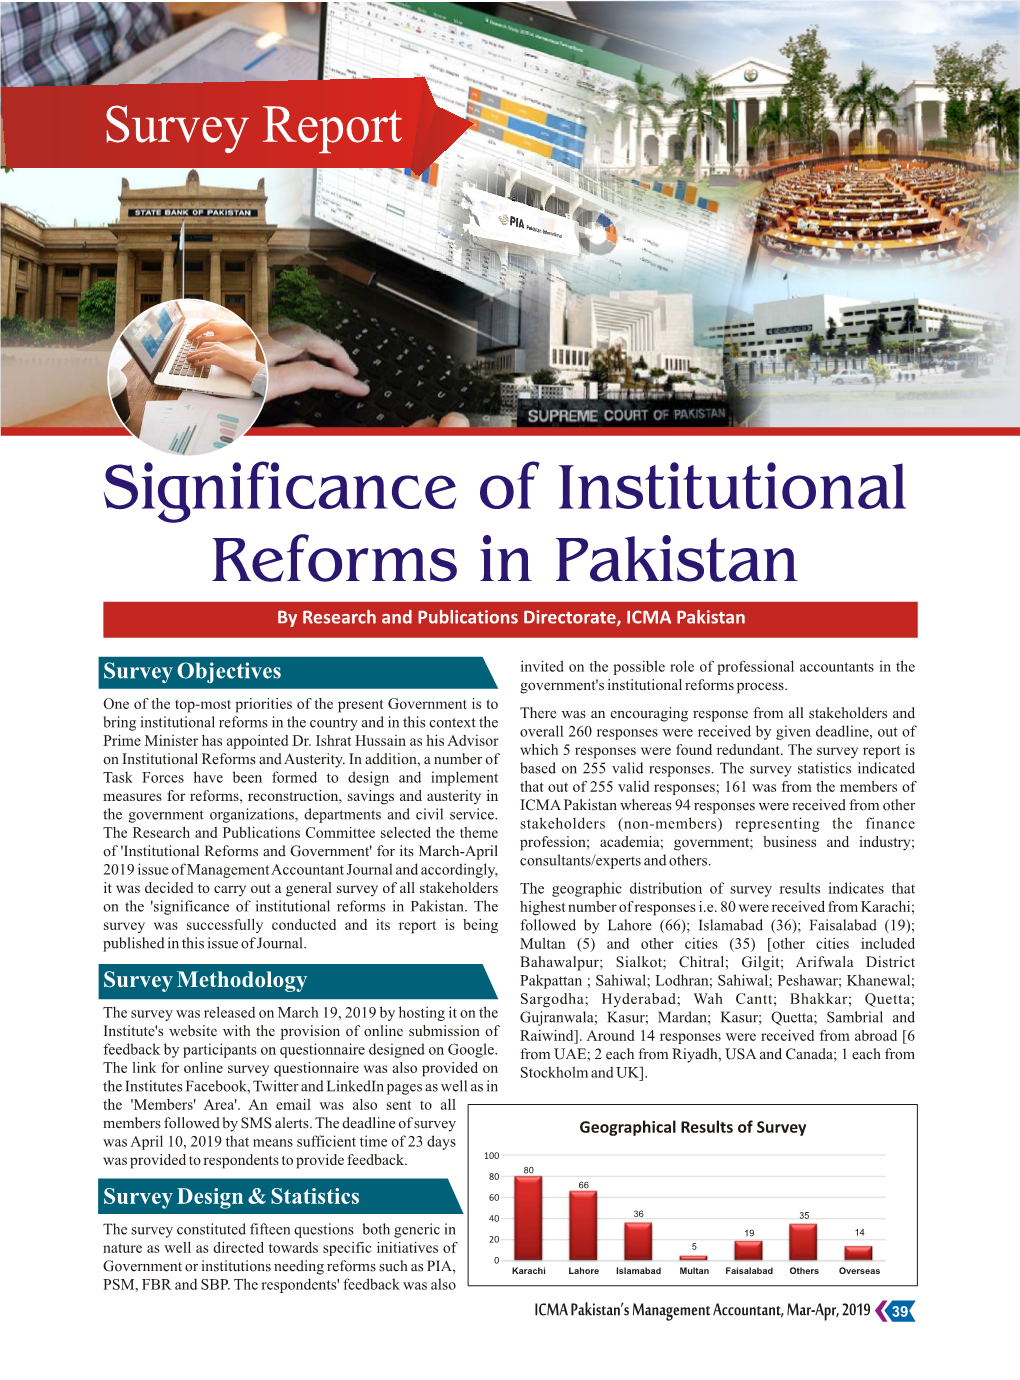 7-Survey Report on Significance of Institutional Reforms